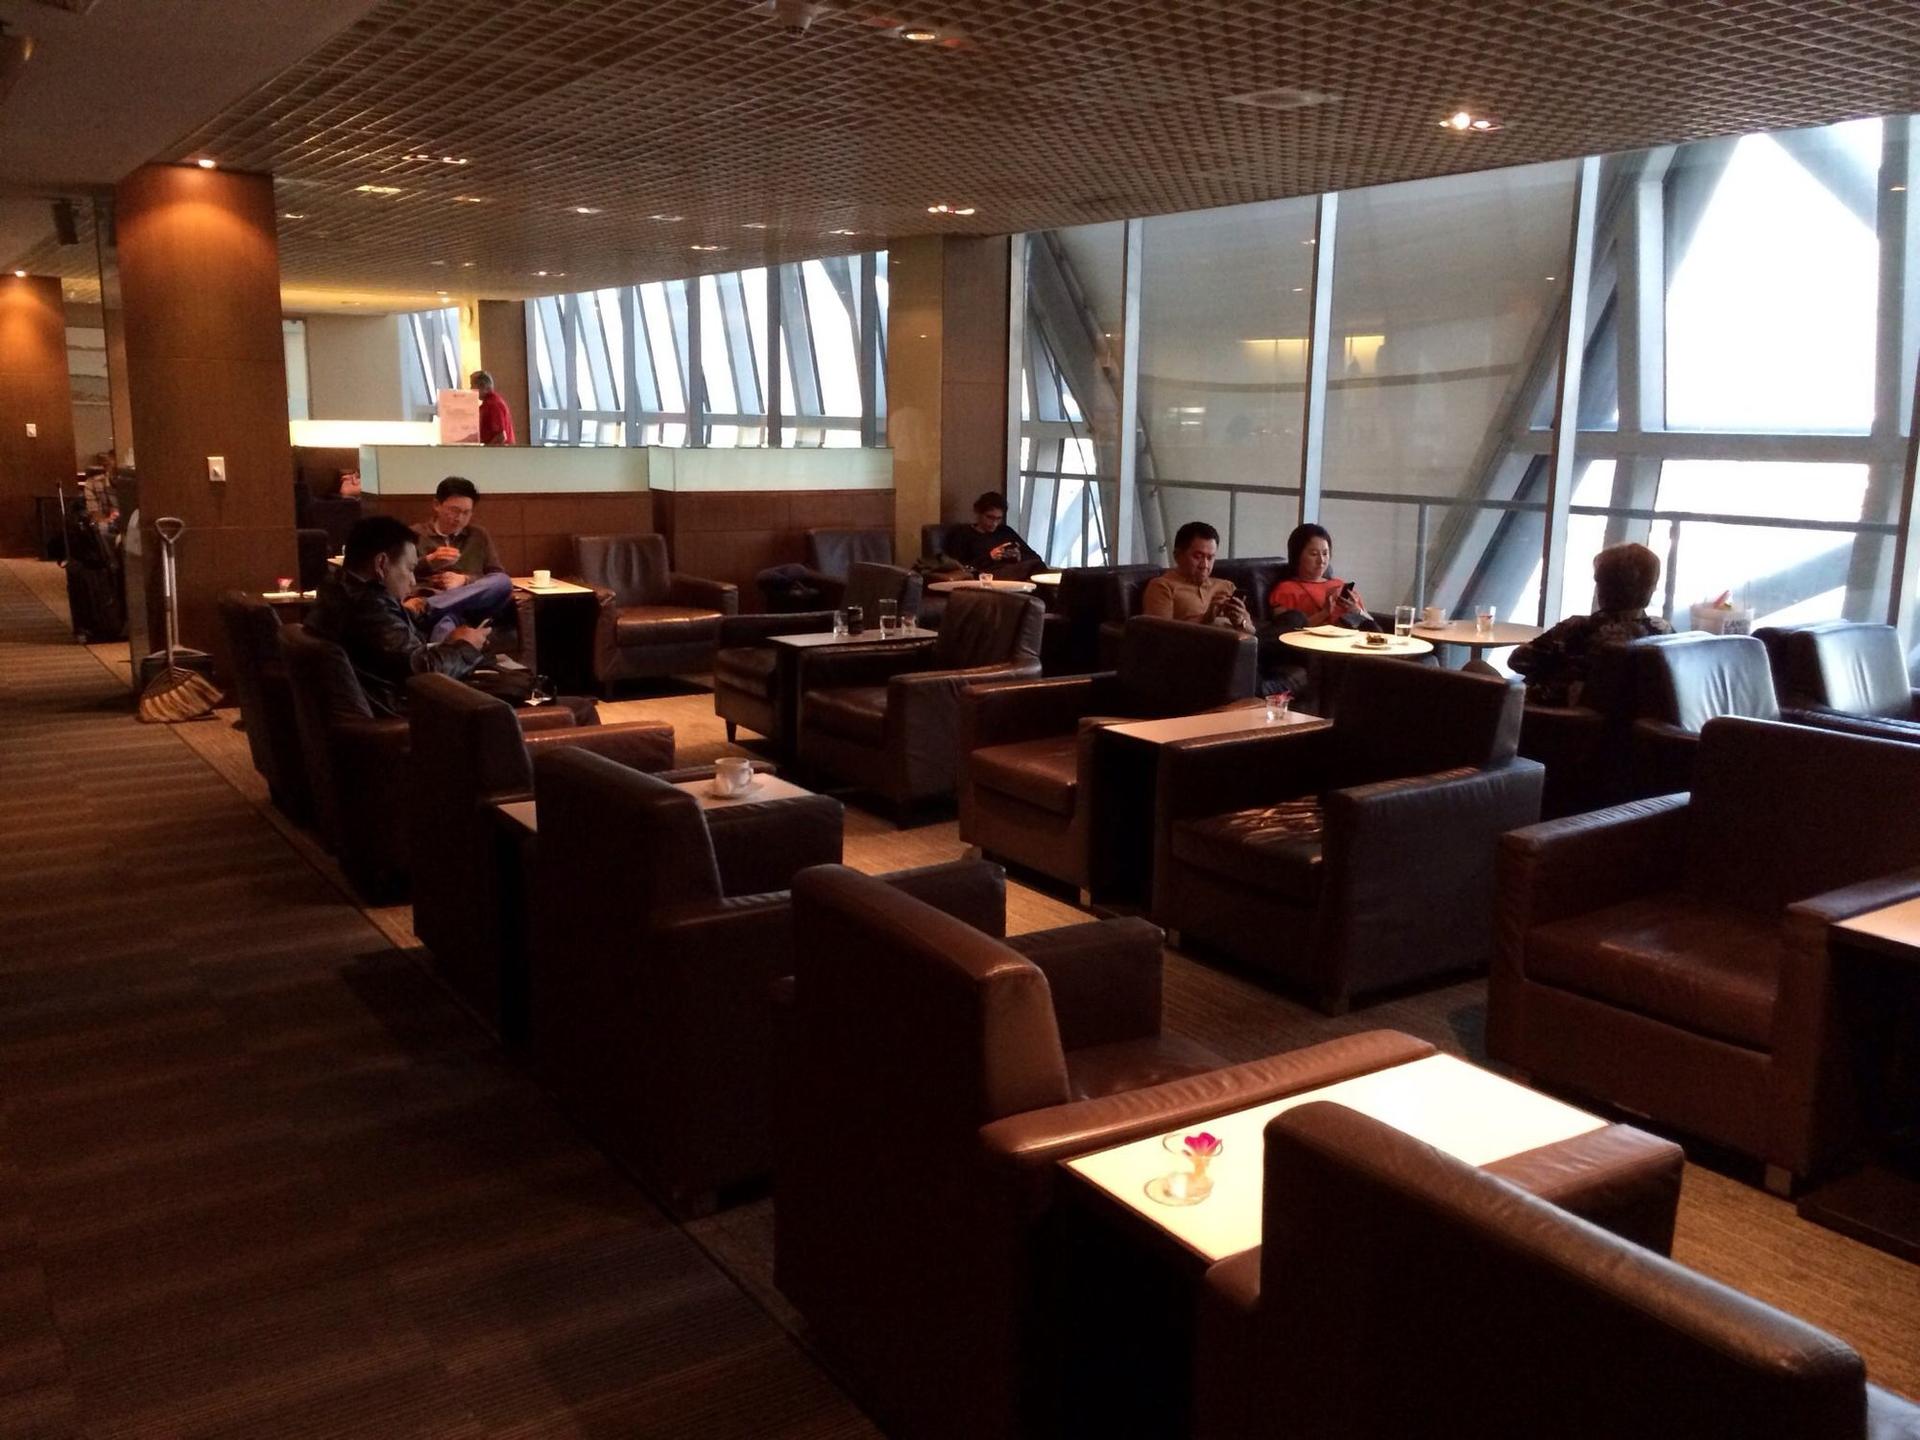 Thai Airways Royal Orchid Lounge image 9 of 15